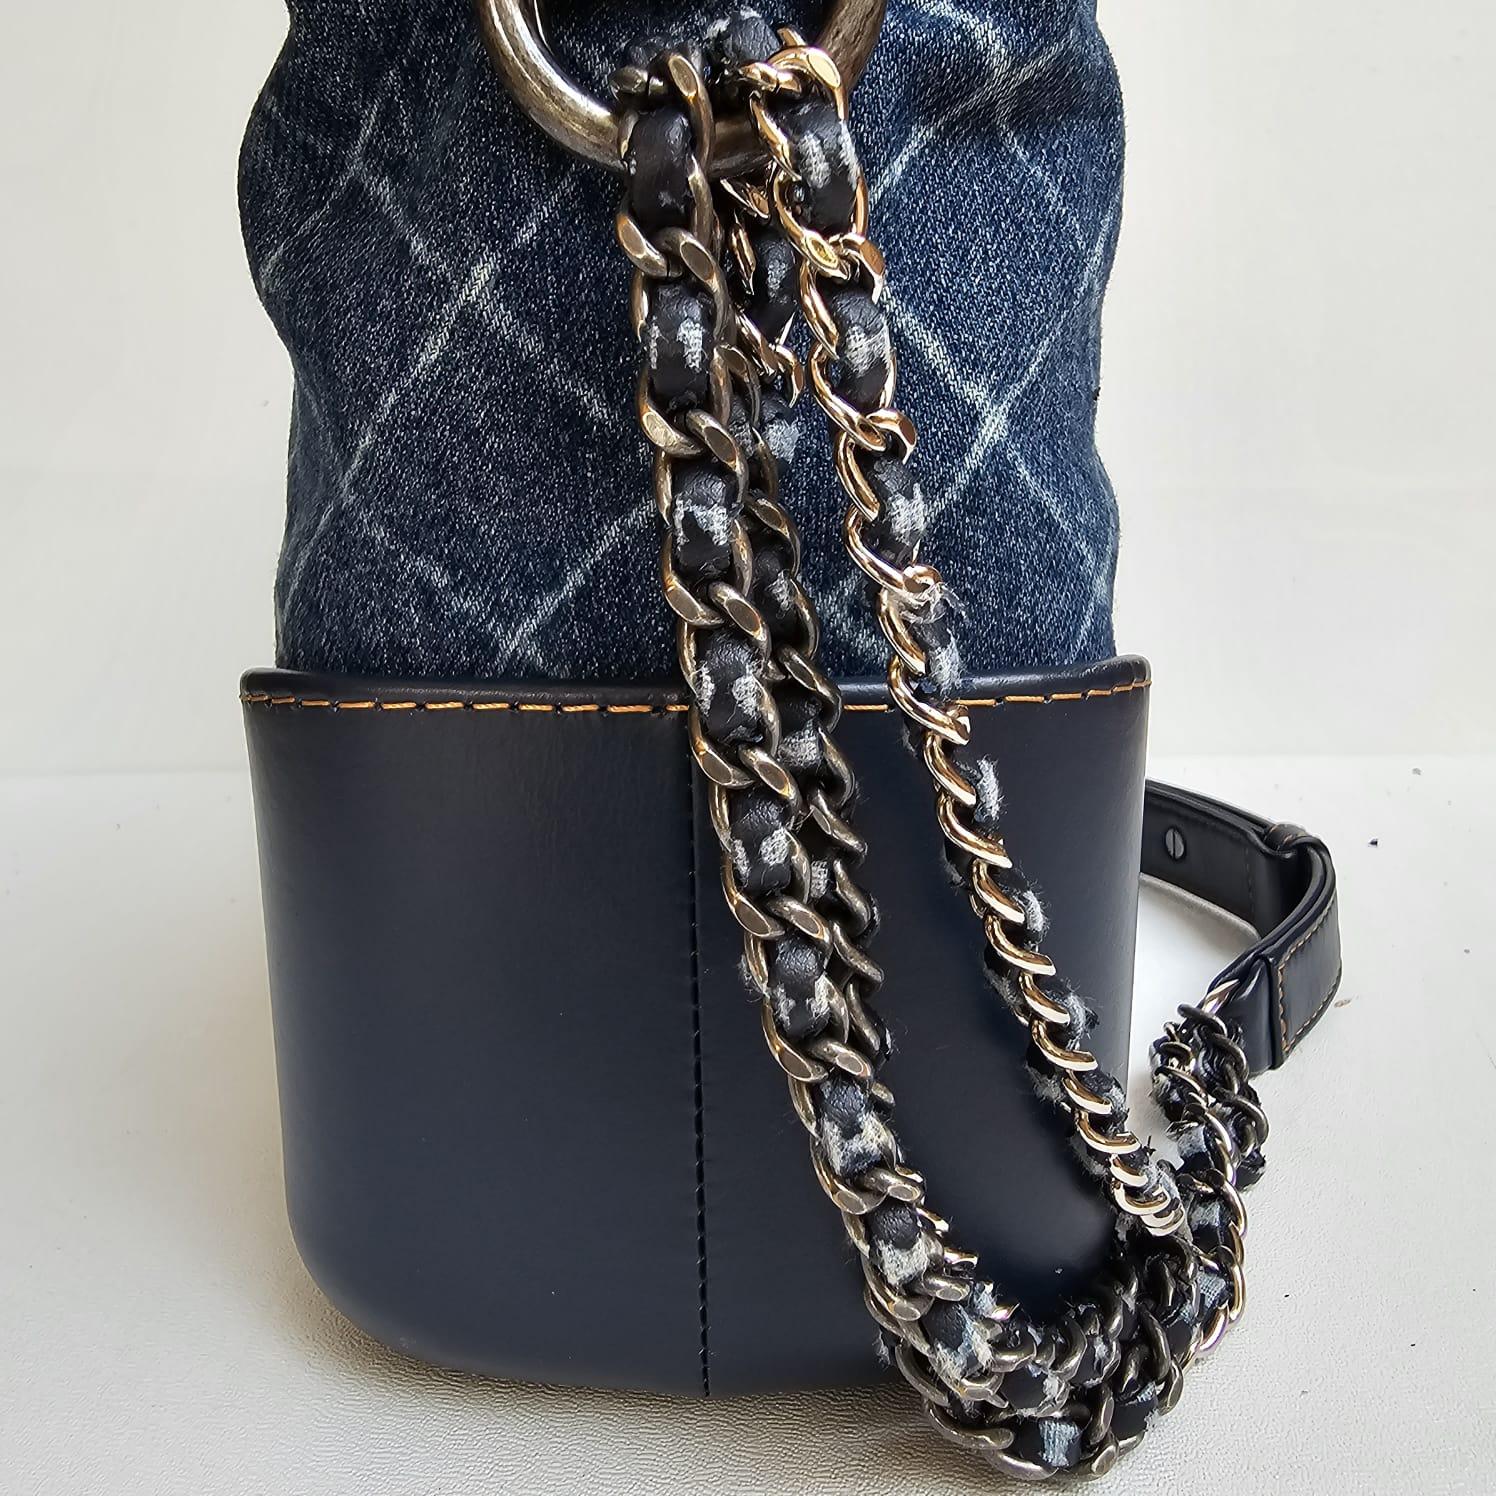 Chanel Medium Denim Quilted Gabrielle Hobo Bag For Sale 4